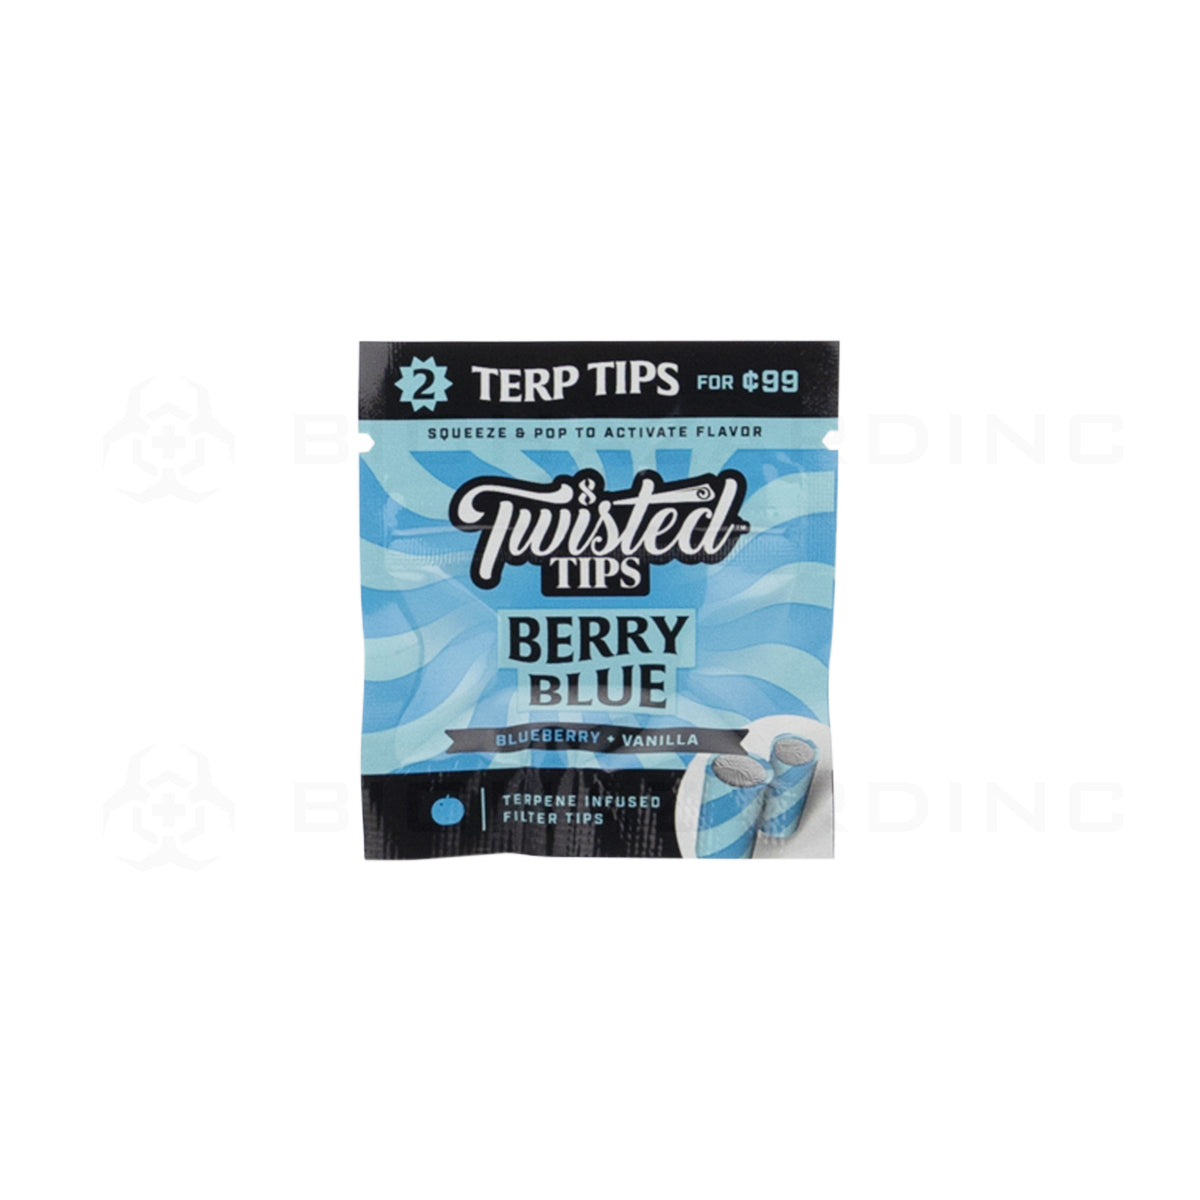 Twisted Tips | 'Retail Display' Terpene Infused 2 Packs | 24 Count Paper Tips Twisted Hemp Berry Blue  